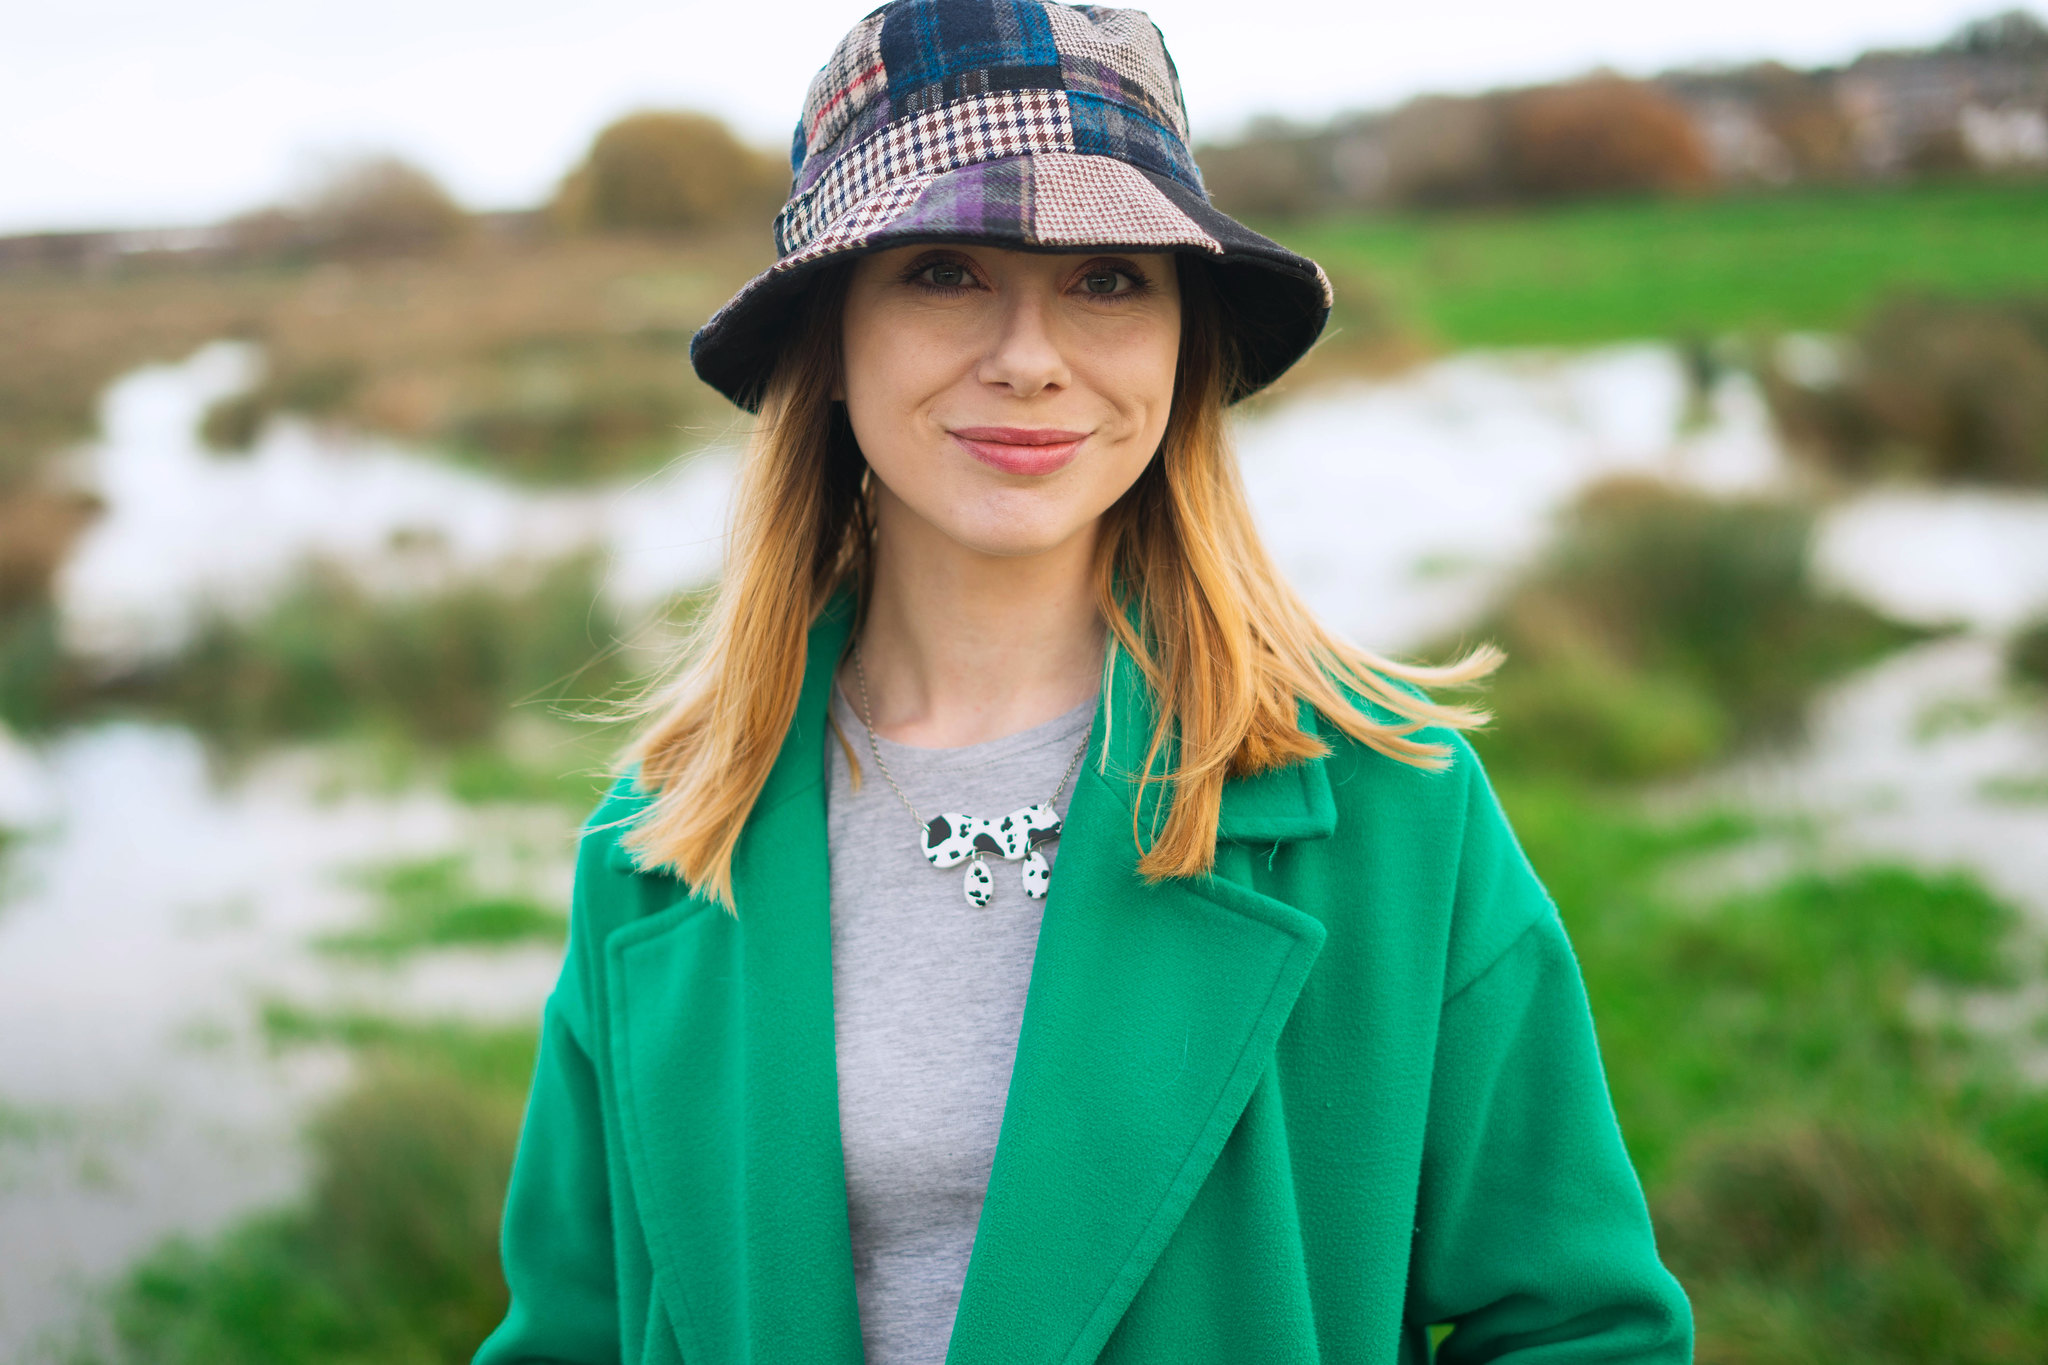 A close up photo of the woman wearing a patchwork tweed bucket hat, a green coat, grey tshirt and a handmade cow print necklace.